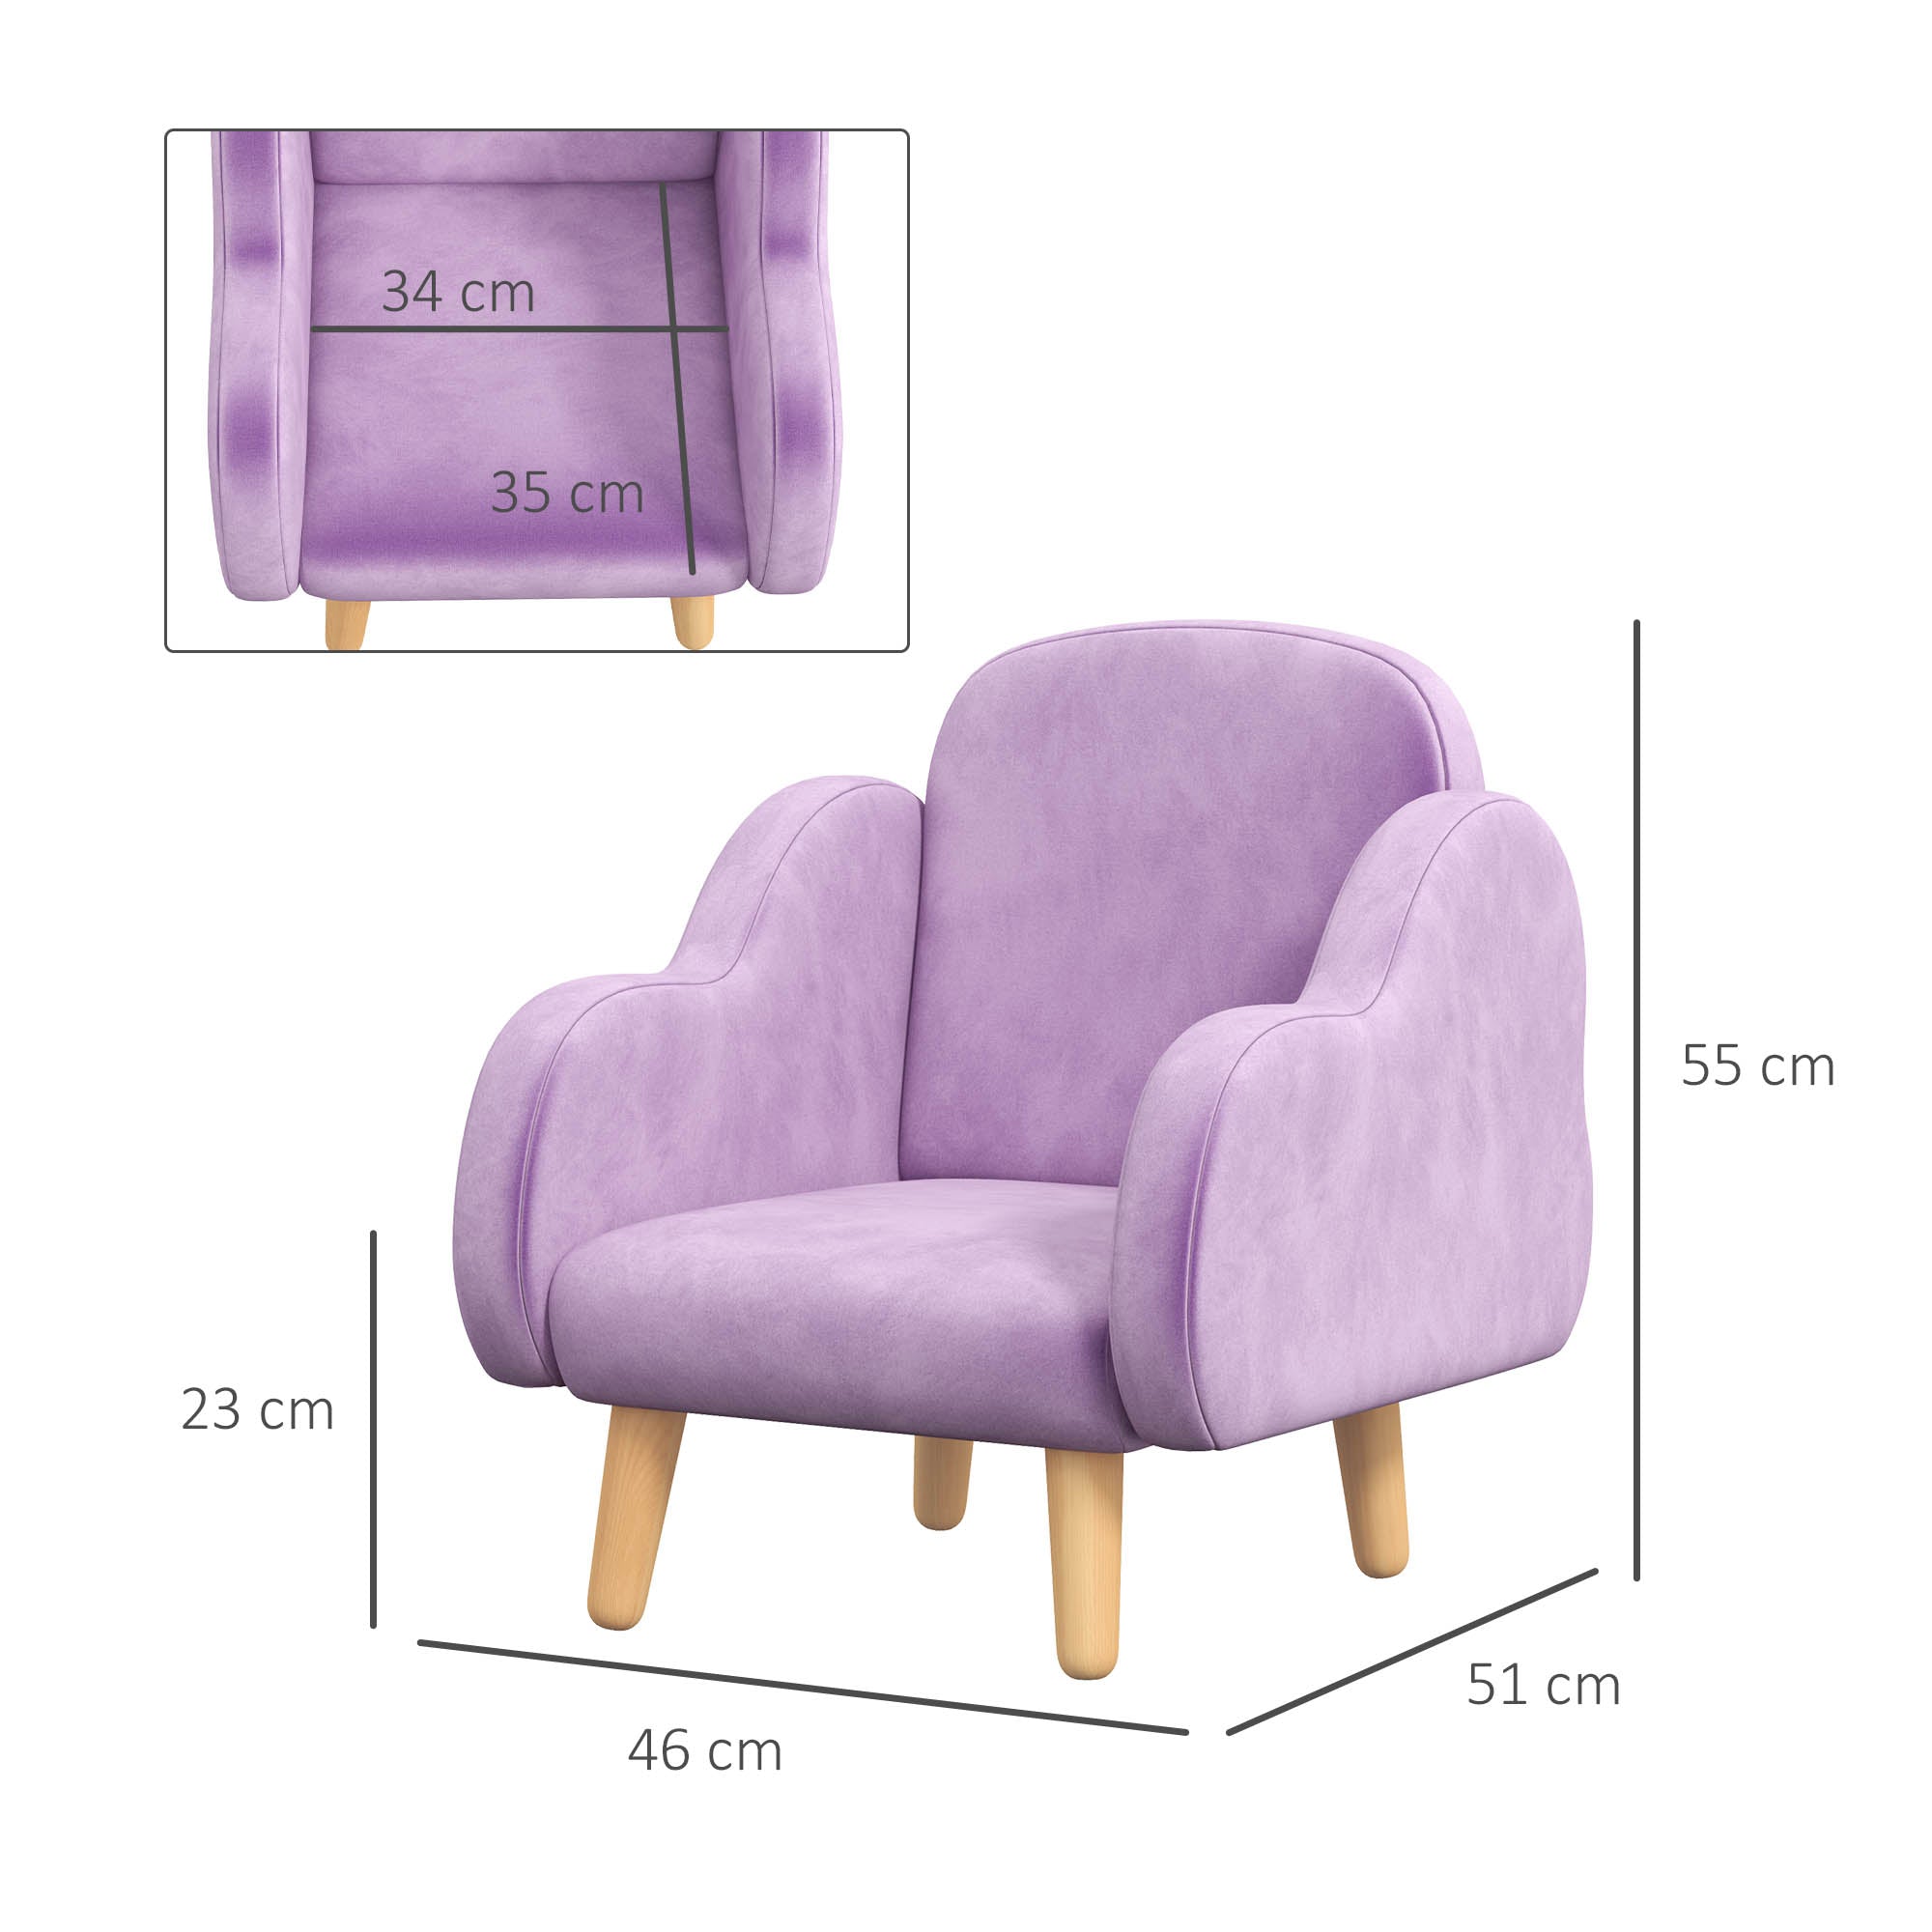 Cloud Shape Toddler Armchair, Ergonomically Designed Kids Chair, Comfy Children Playroom Mini Sofa for Relaxing, for Ages 1.5-5 Years - Purple-2